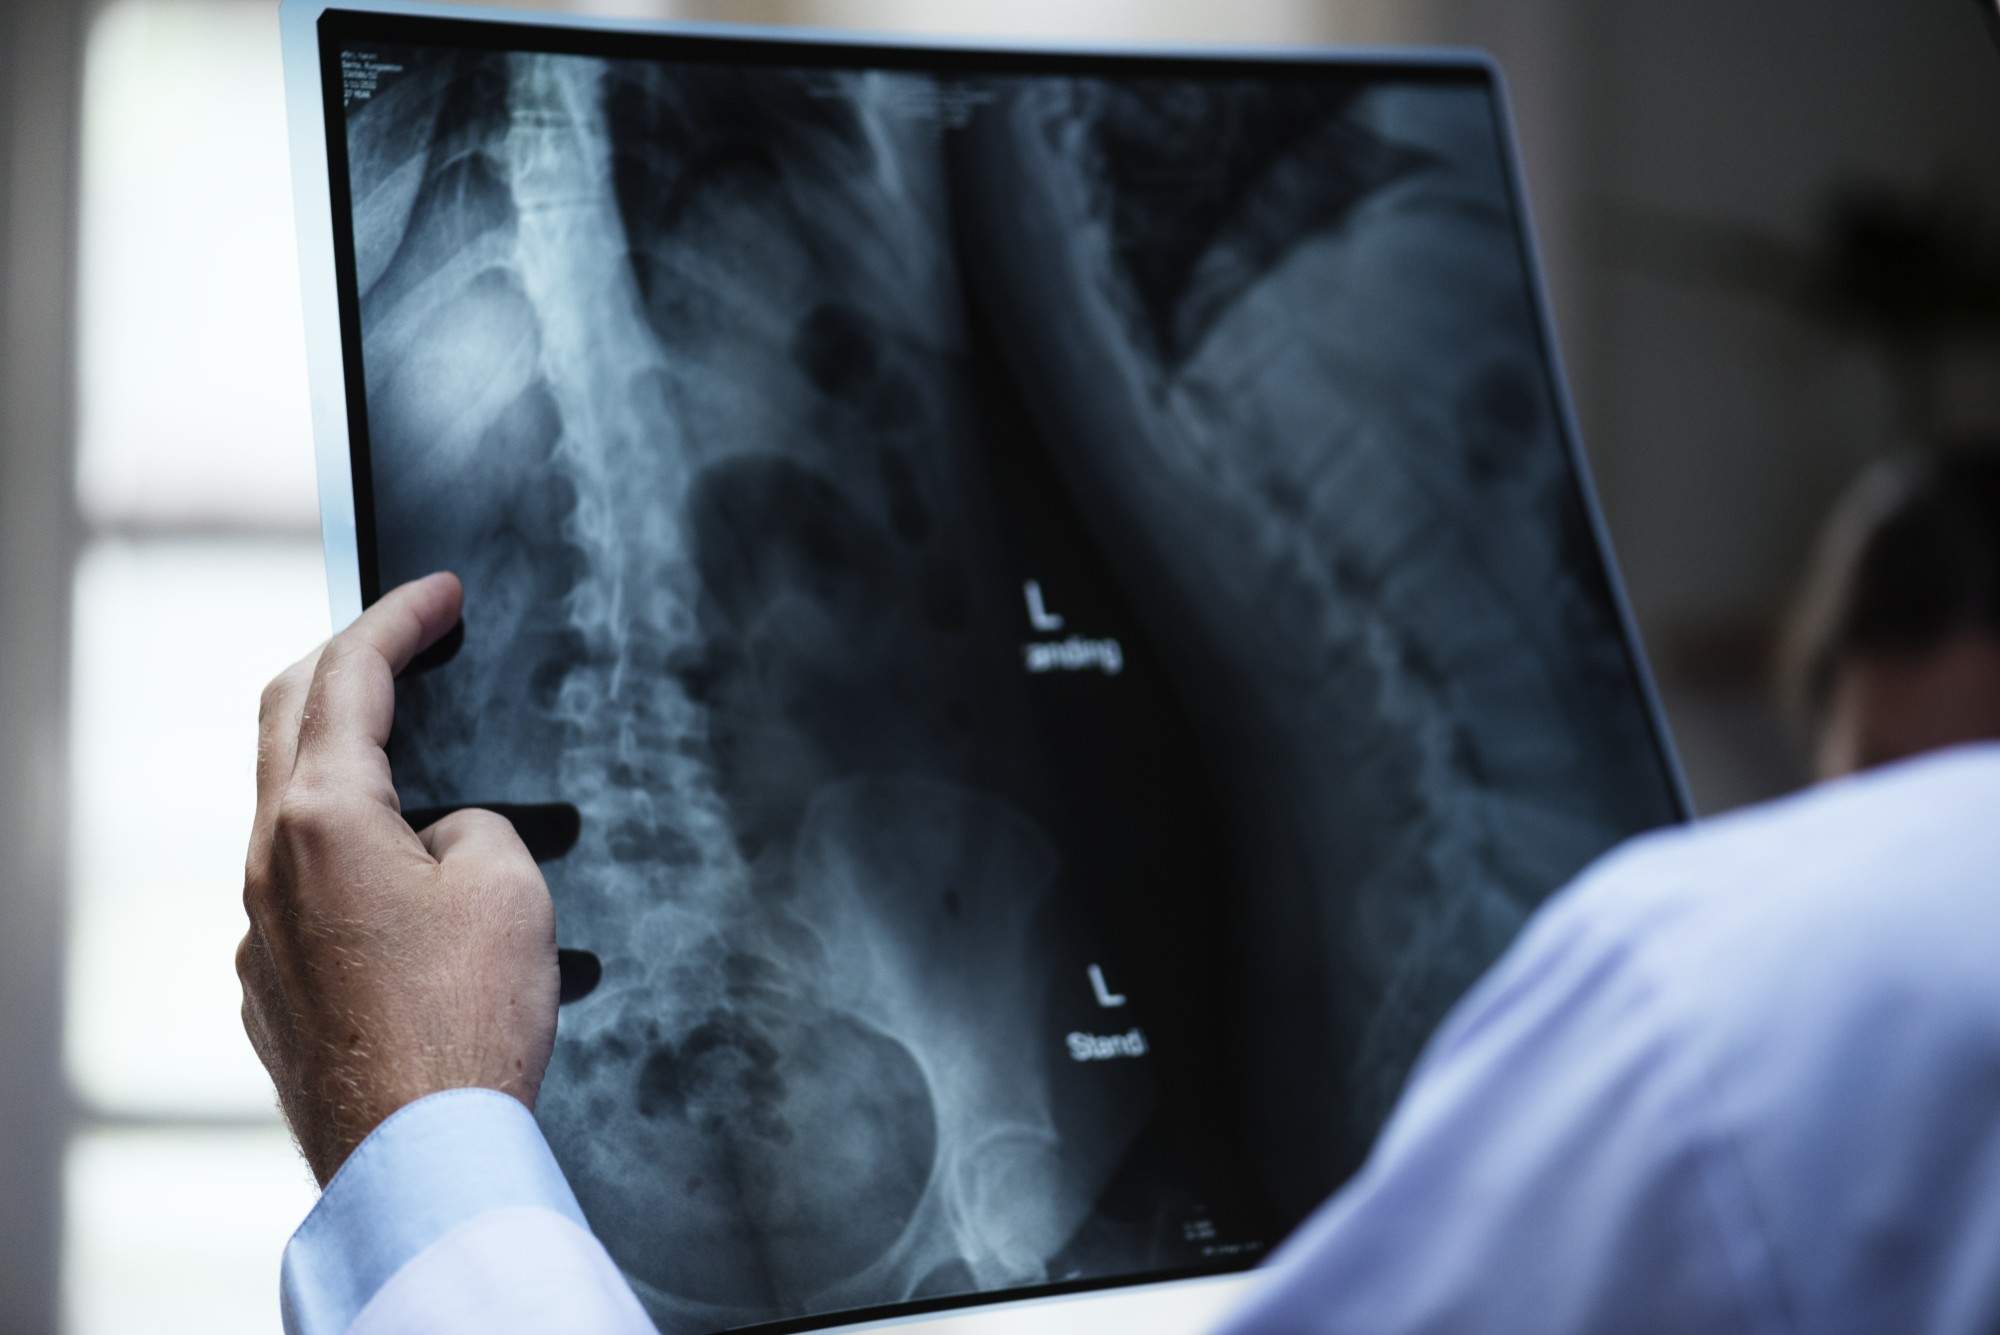 Radiography vs. Radiology: What Are the Differences?